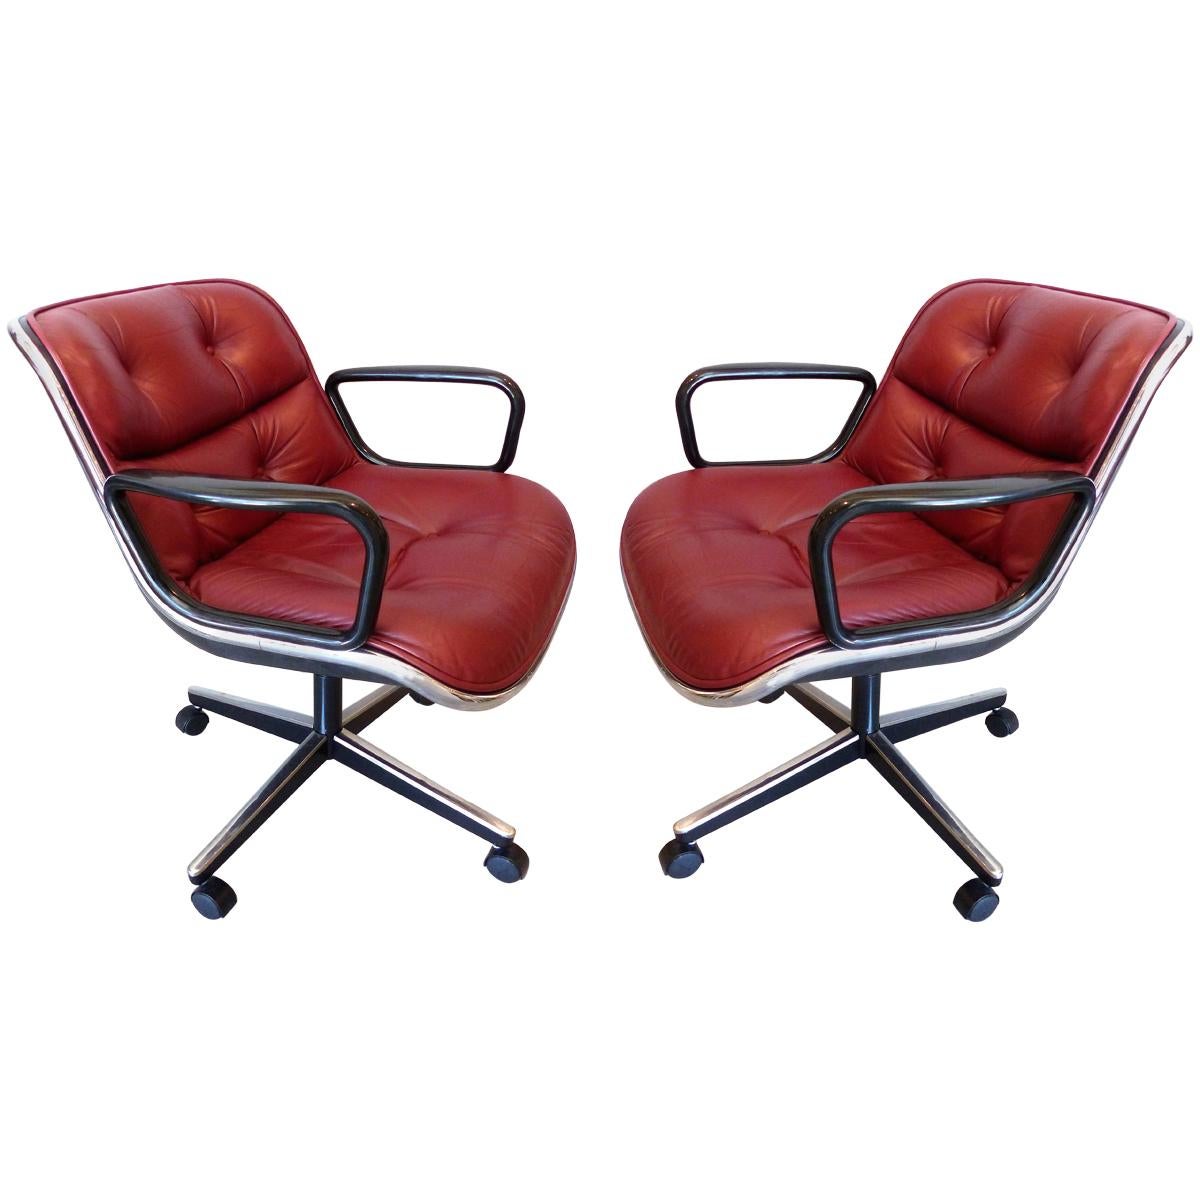 Charles Pollack Modern Executive Swivel Chairs for Knoll, 3 Pairs Available